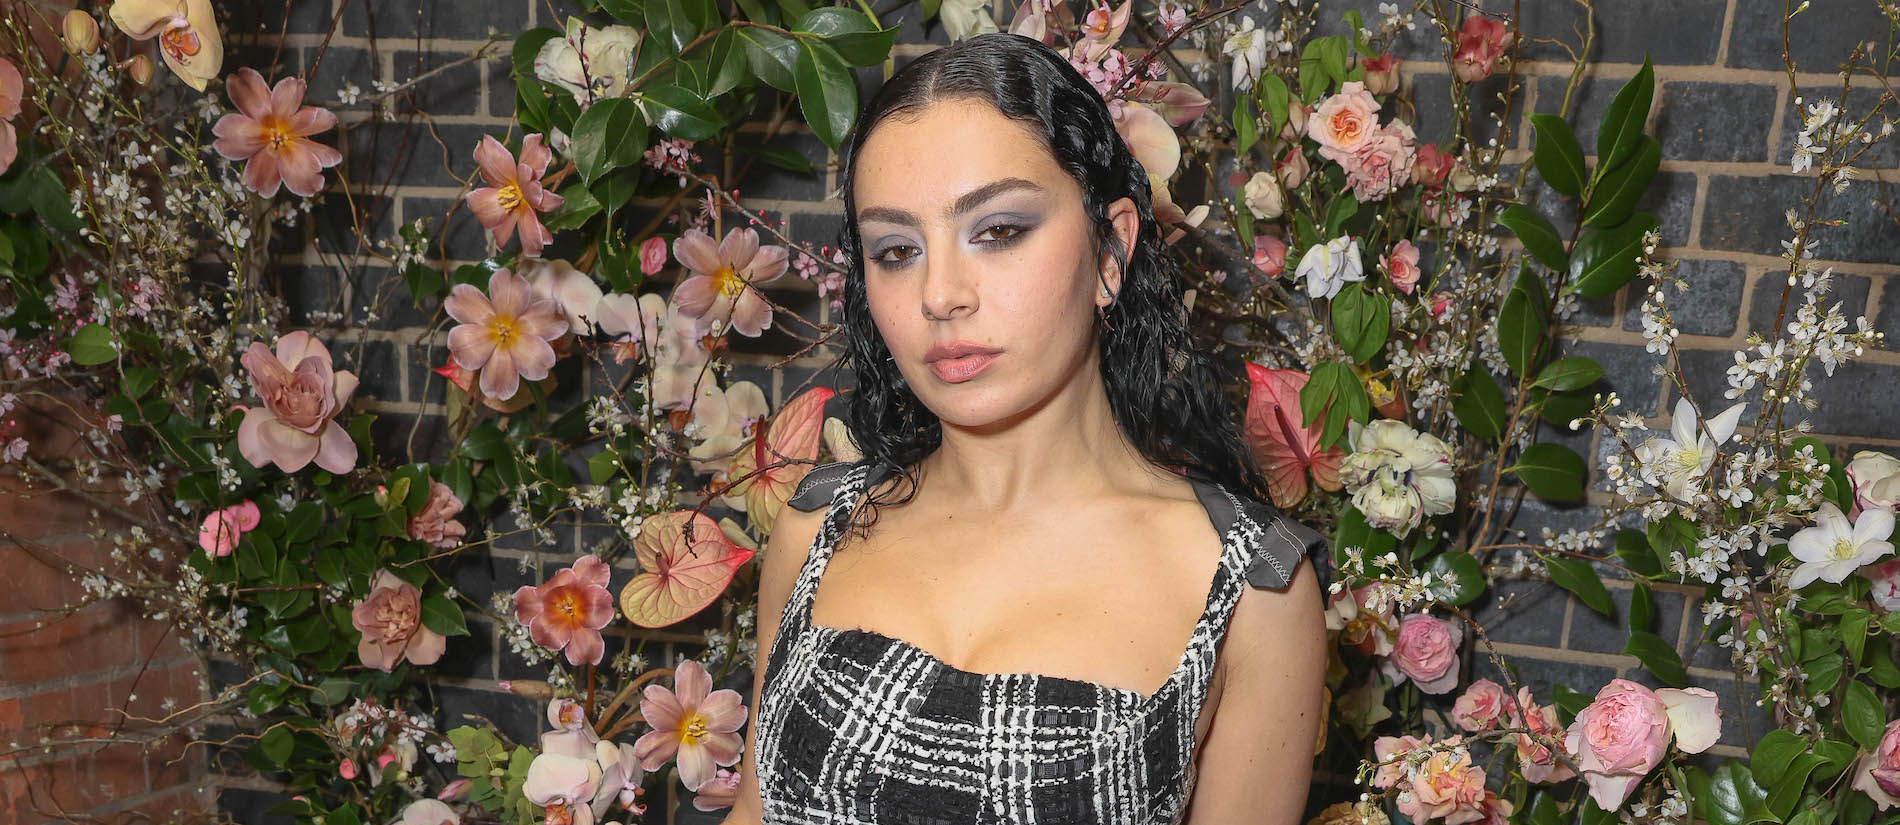 What Did Charli XCX Say About 'Crash?'